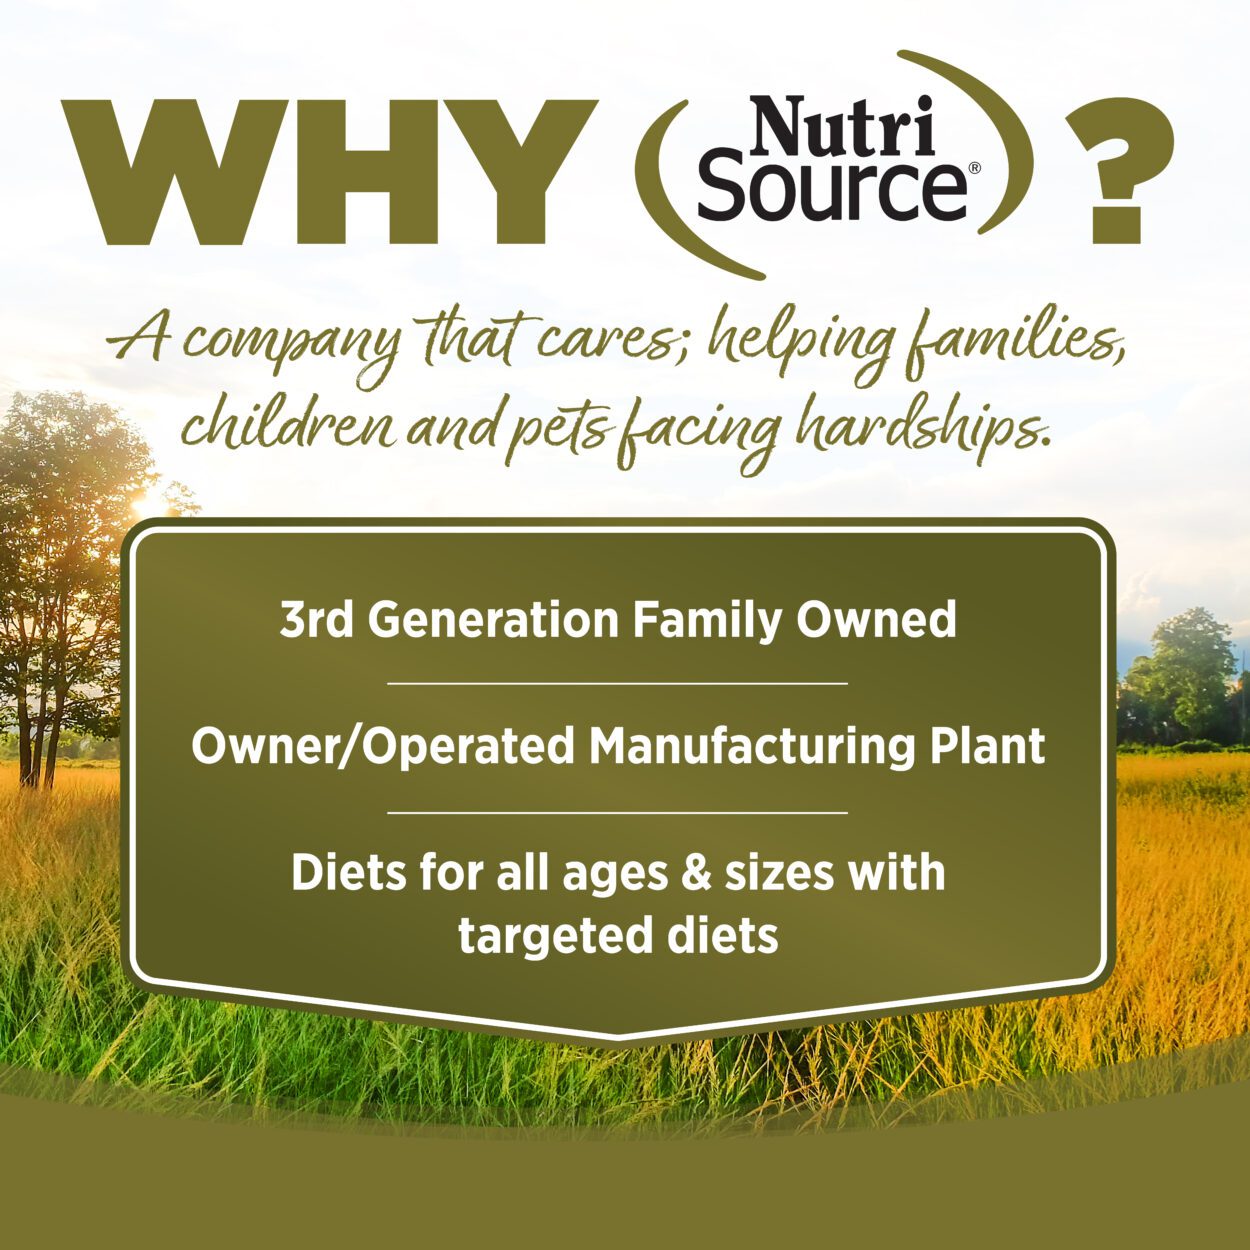 Why NutriSource?